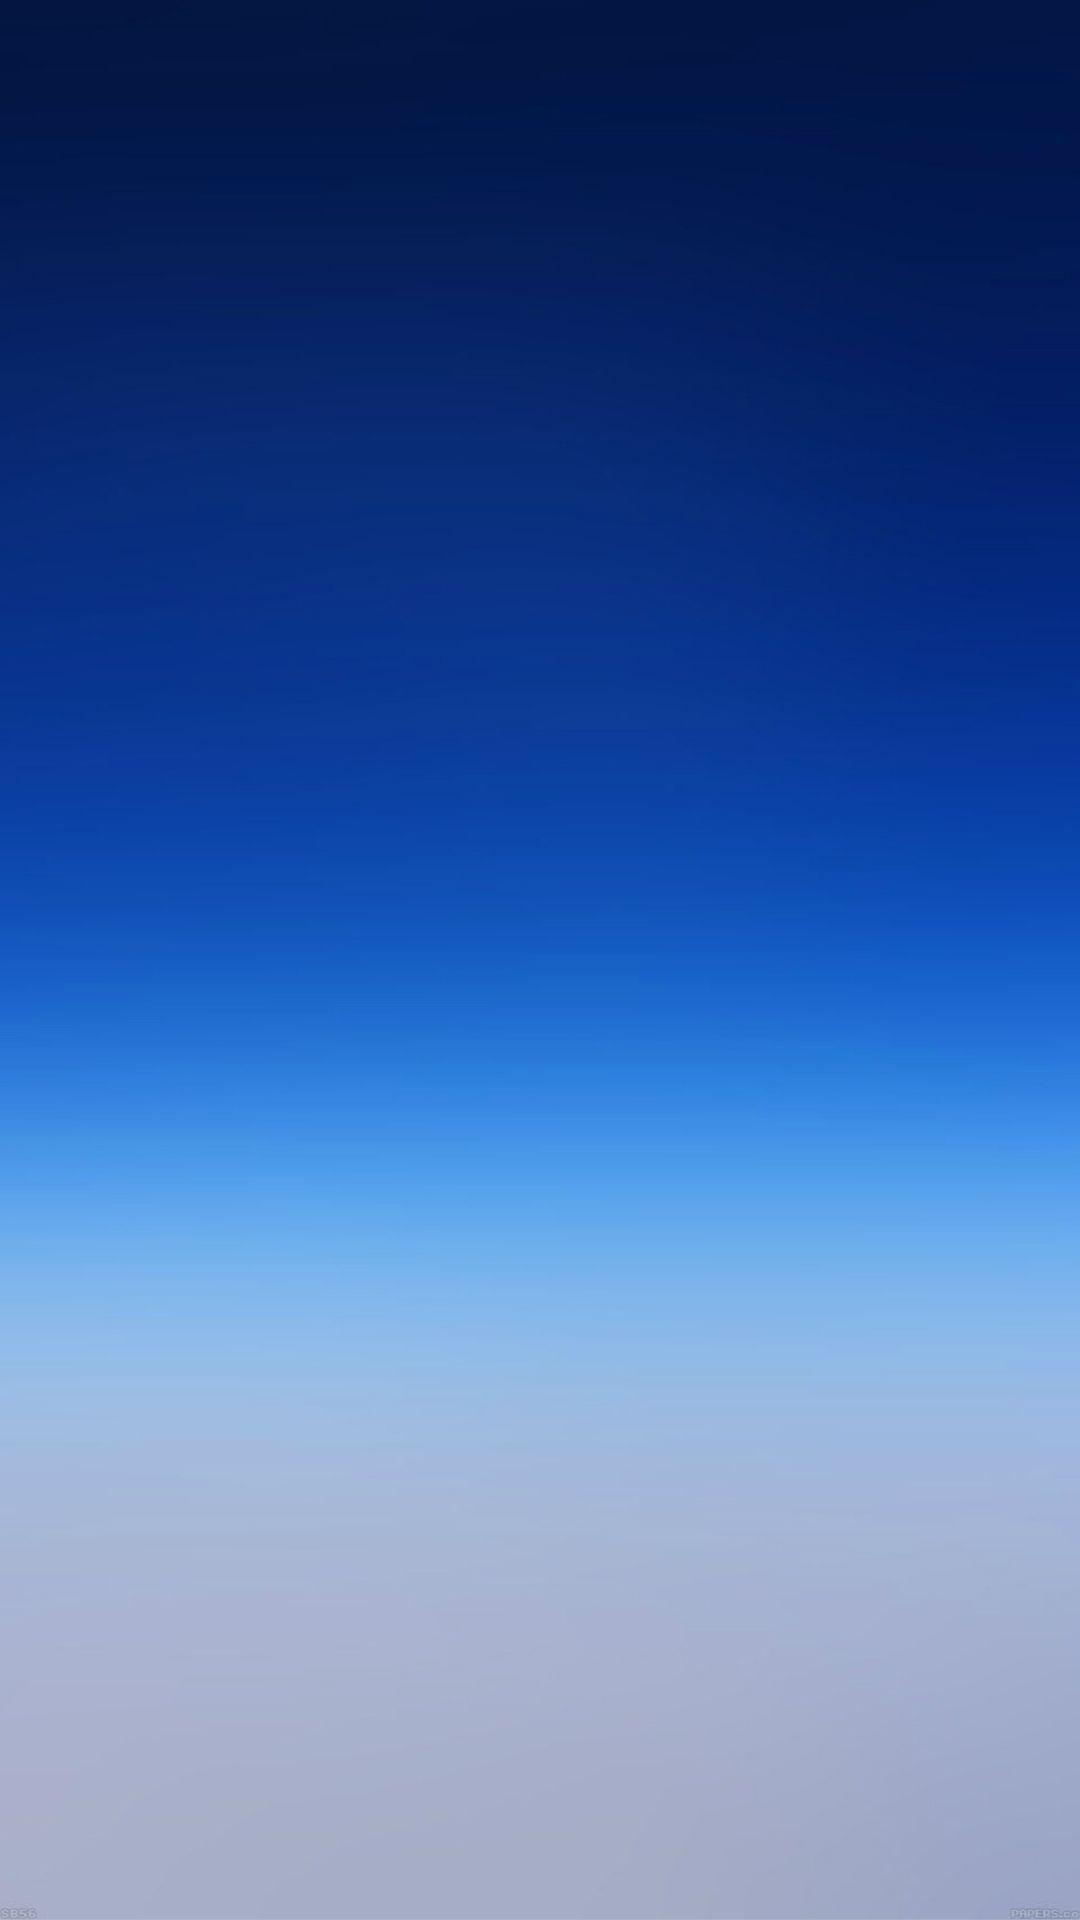 Abstract Pure Simple Blue Gradient Color Background iPhone 6 Wallpaper Download. iPhone Wallpap. Ombre wallpaper iphone, Plain wallpaper iphone, Ombre wallpaper